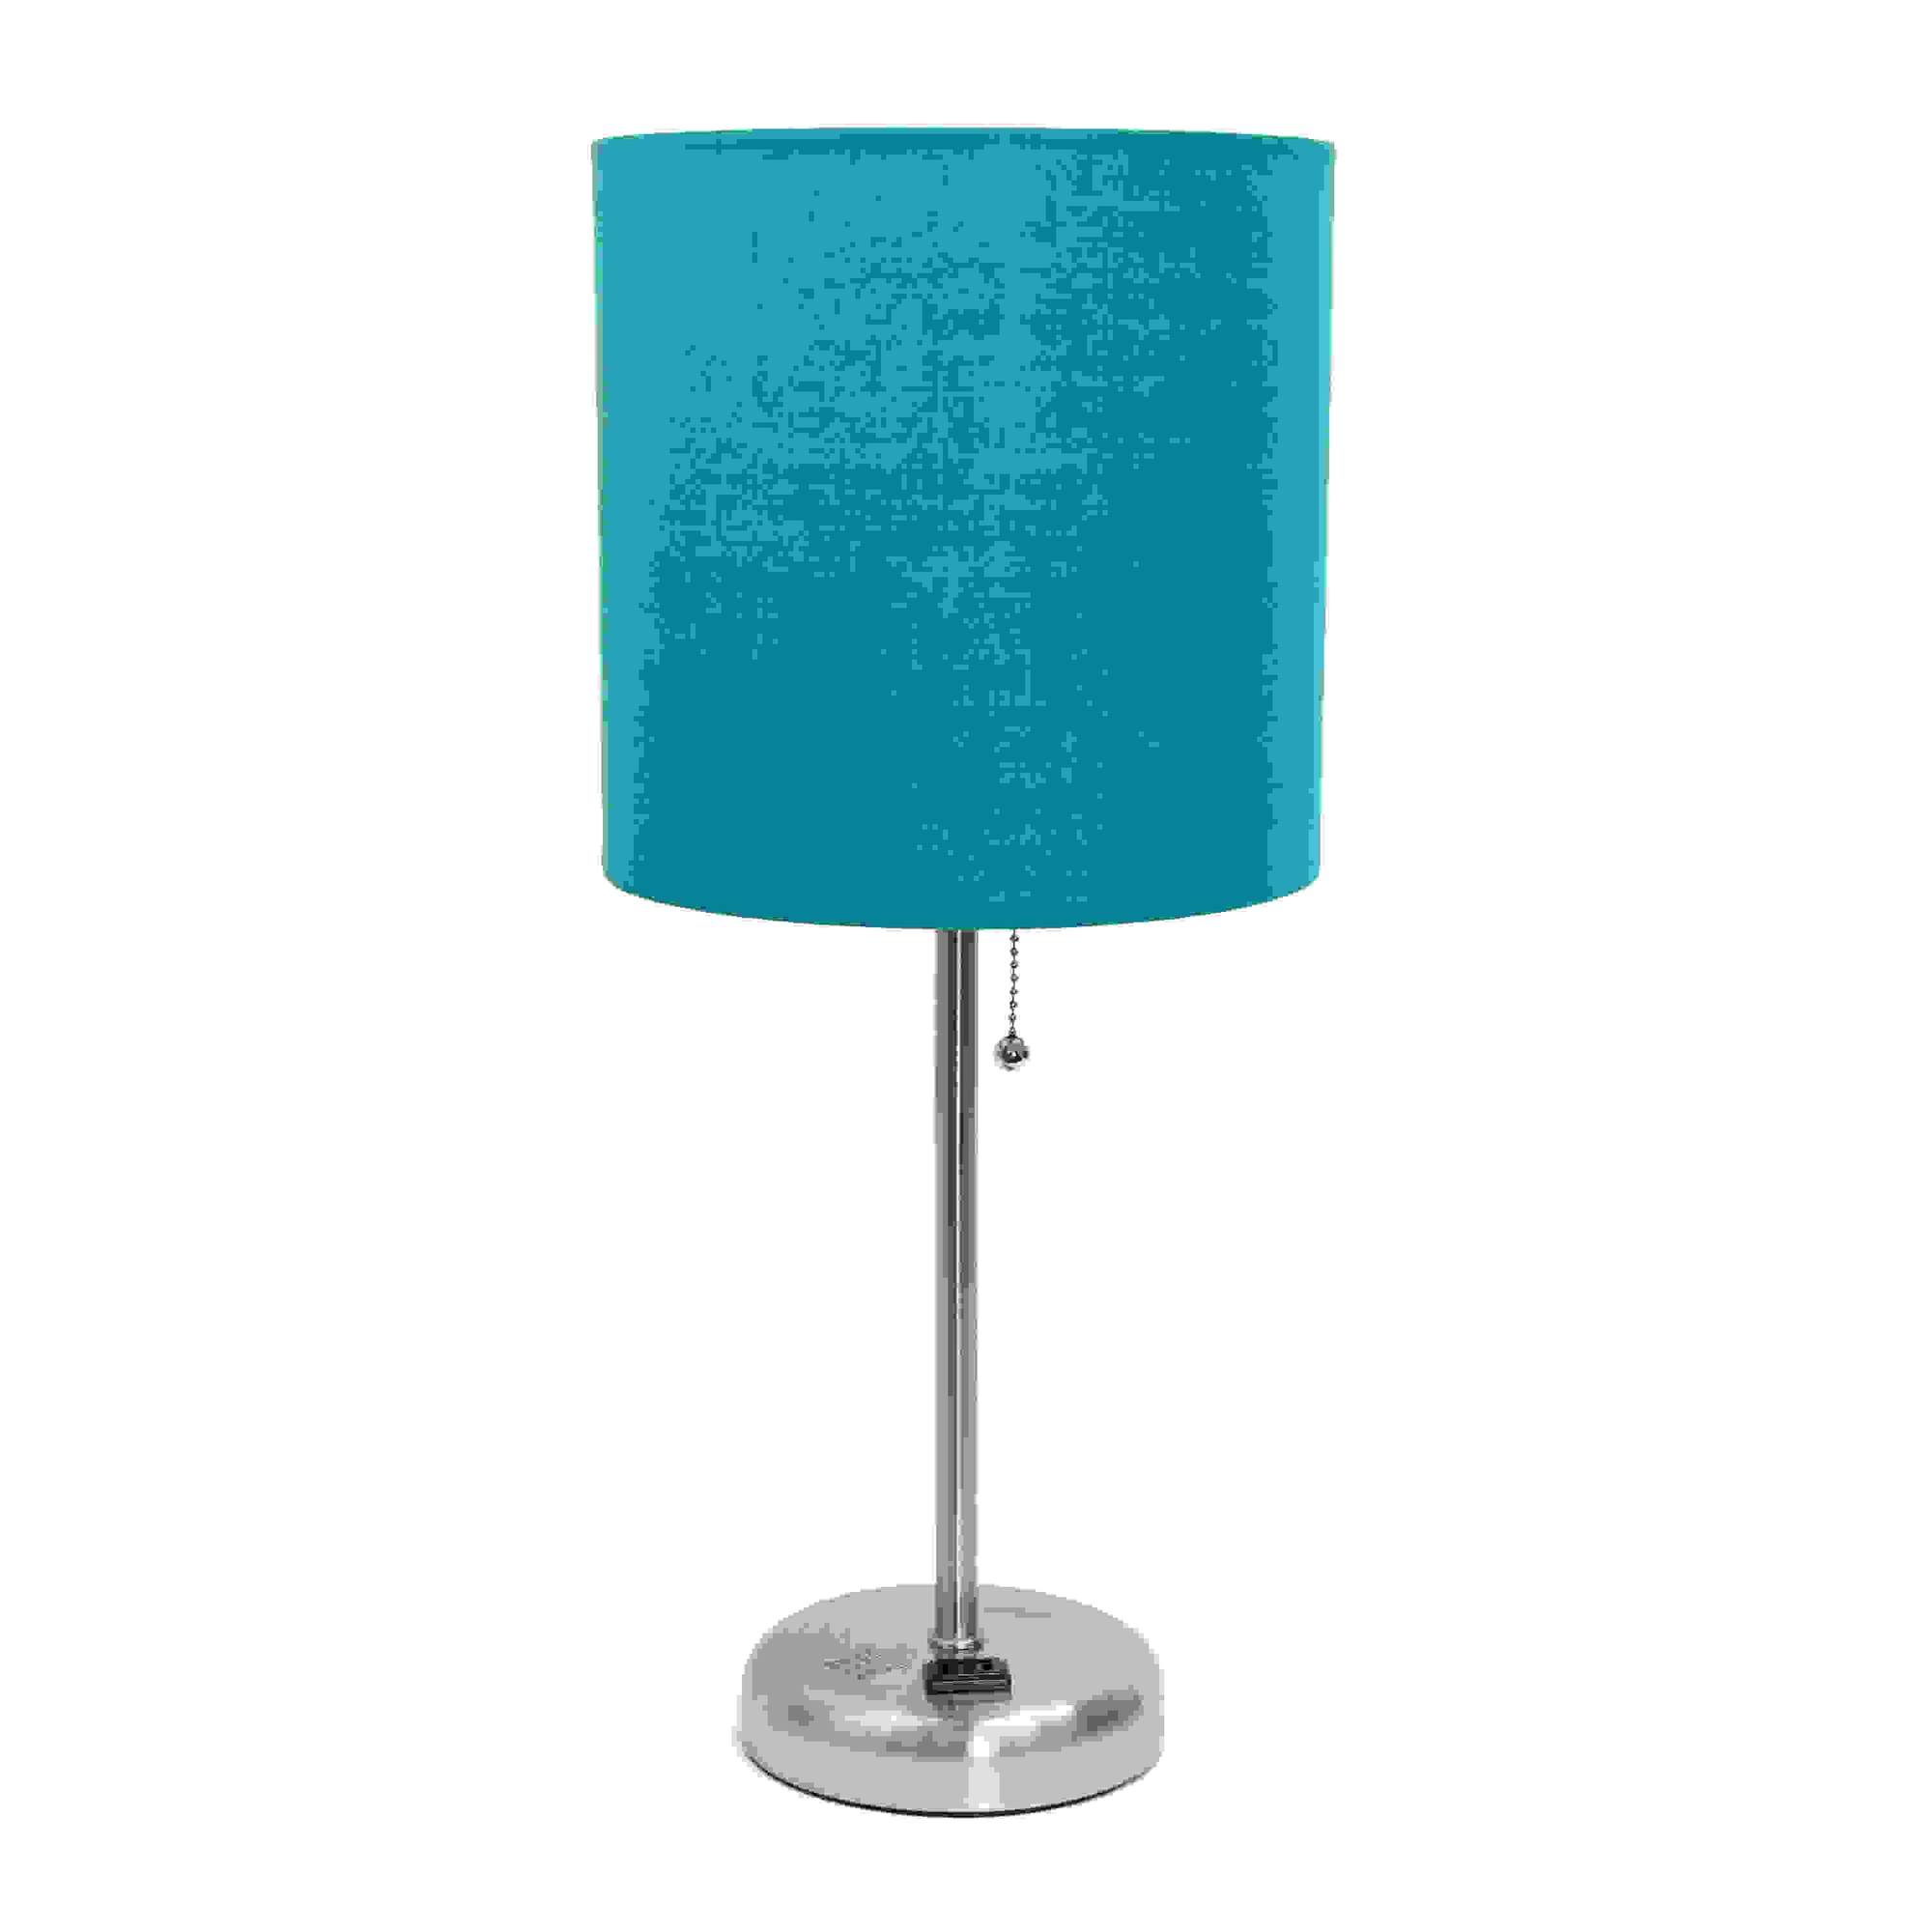 Simple Designs Stick Lamp with Charging Outlet and Fabric Shade, Teal